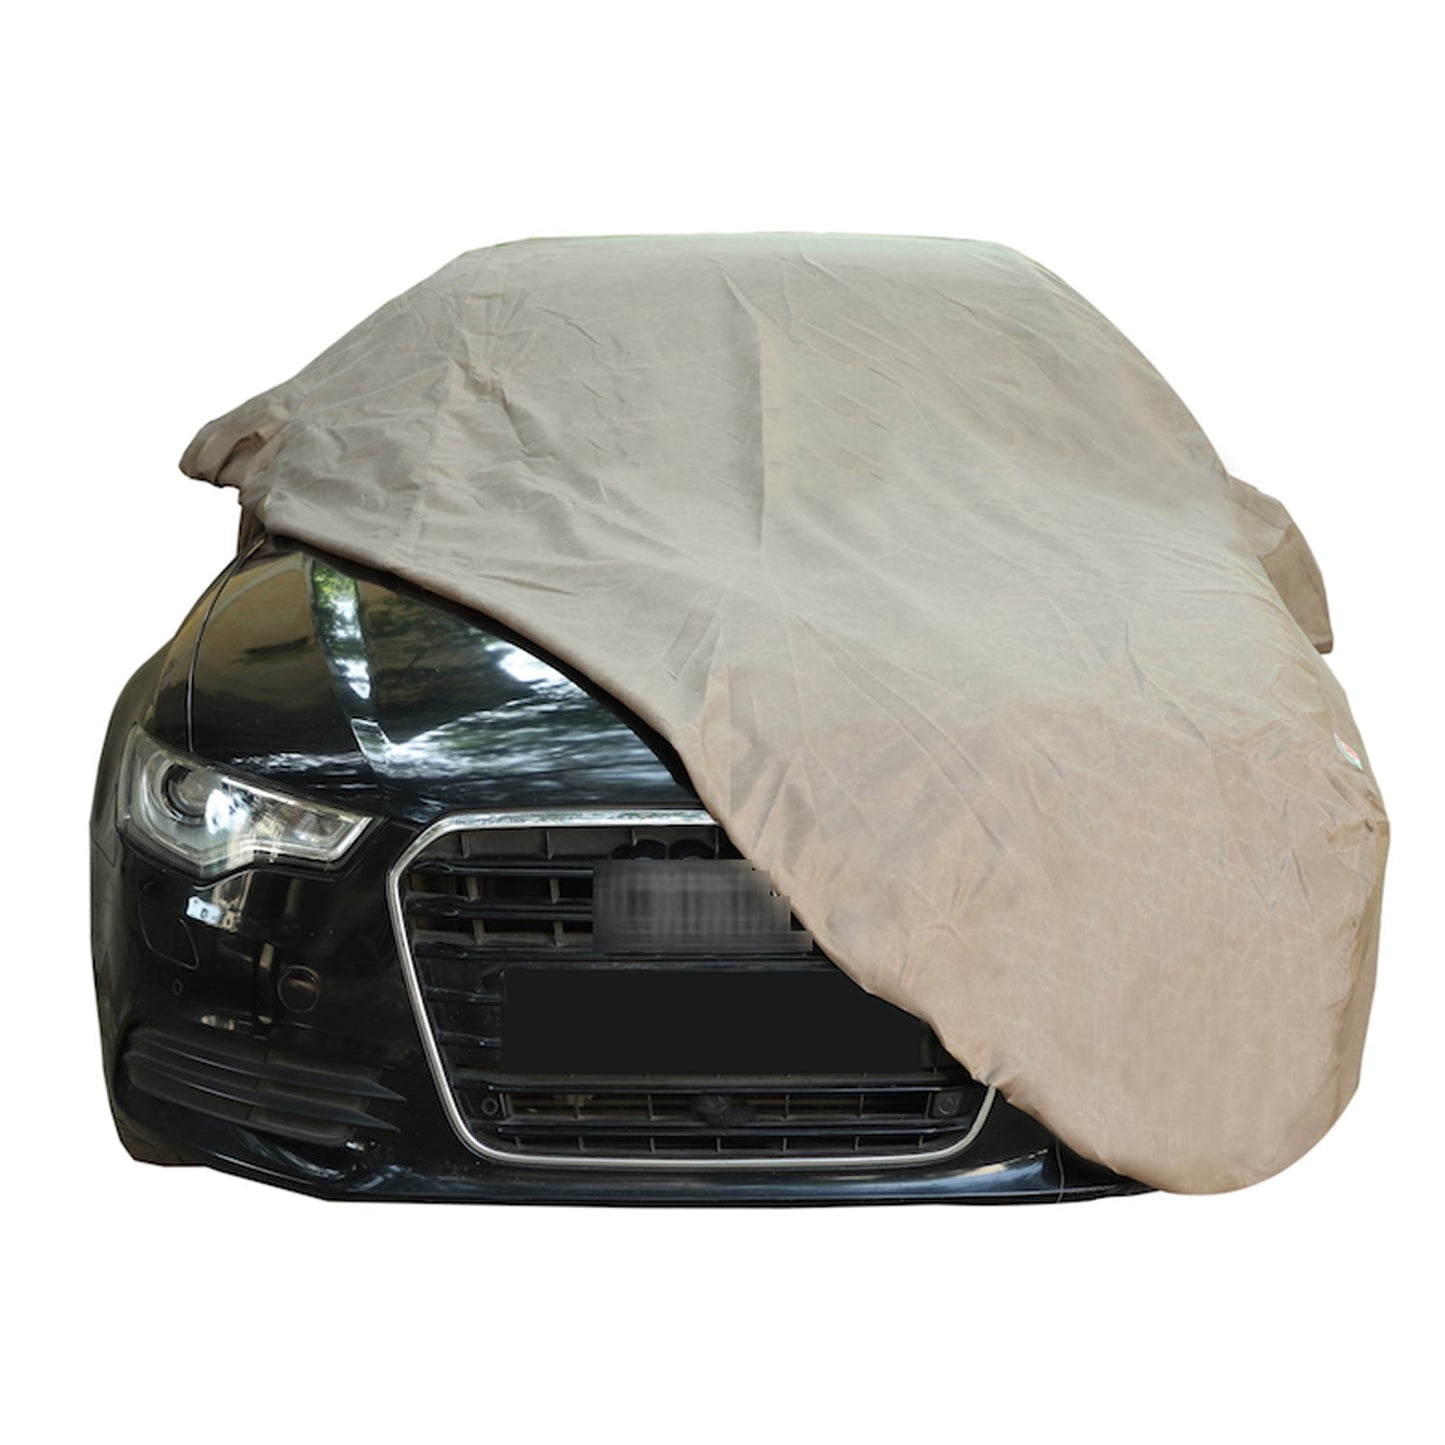 Oshotto Brown 100% Waterproof Car Body Cover with Mirror Pockets For Volkswagen Tiguan